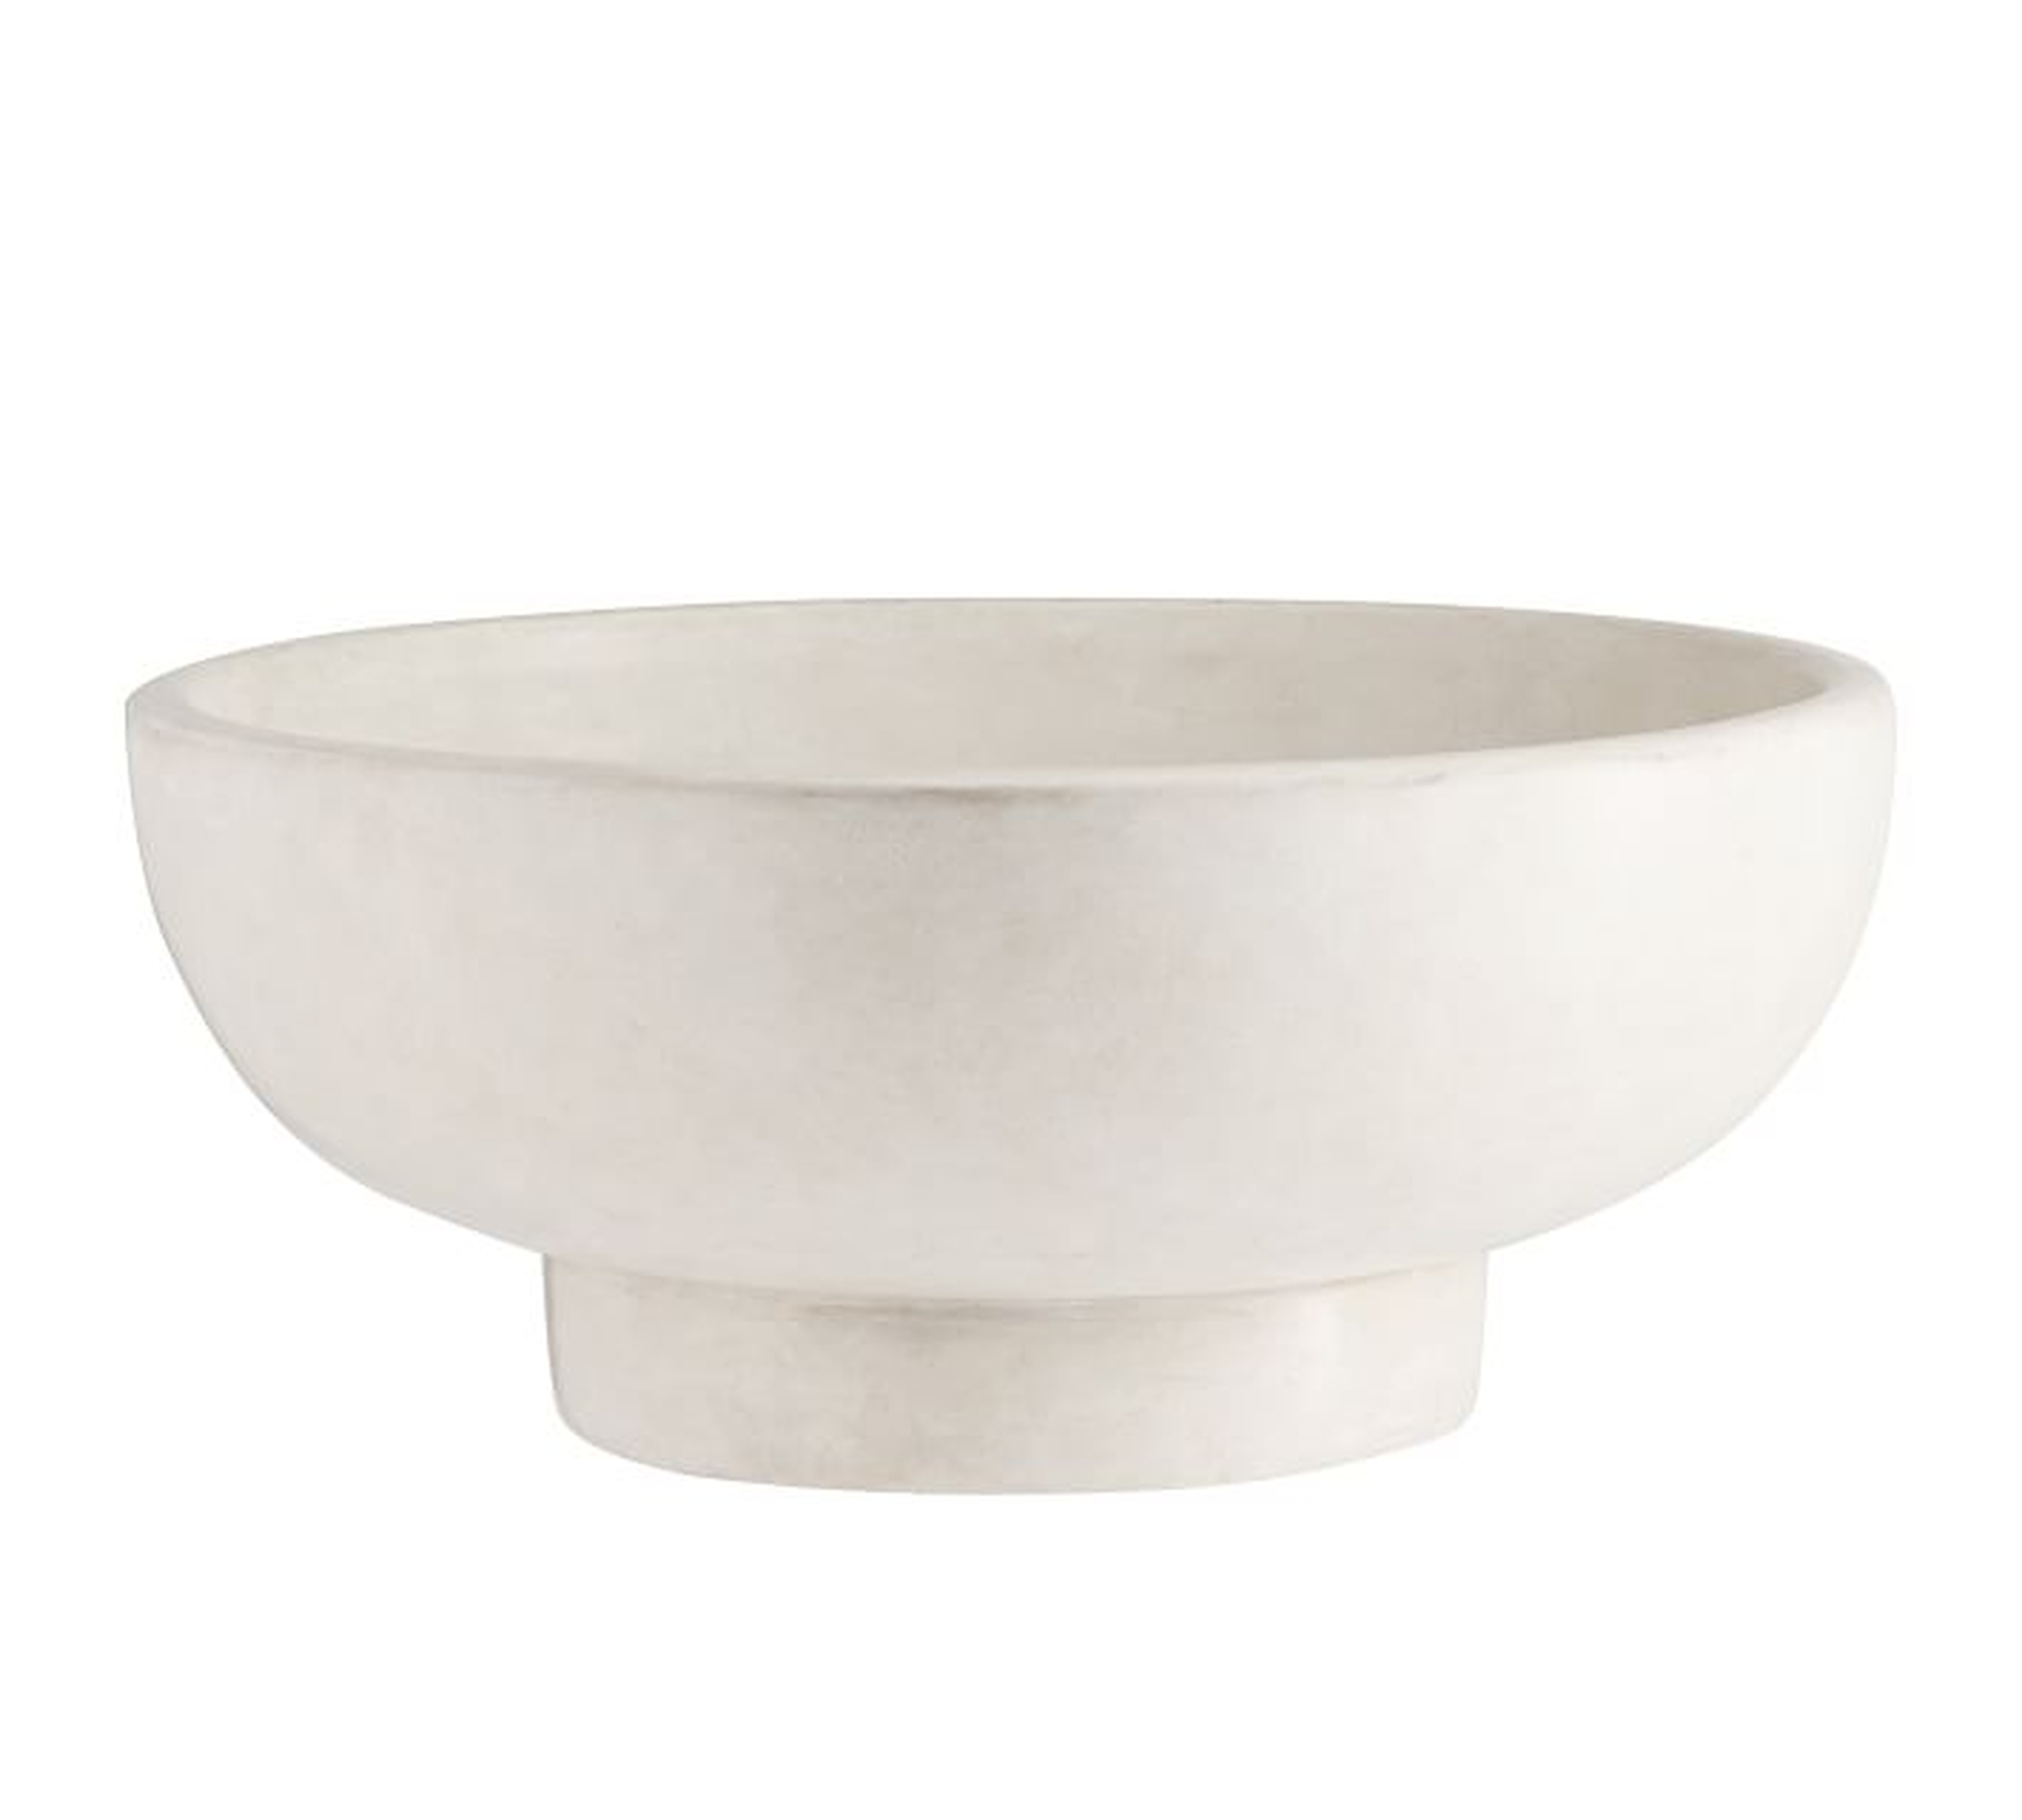 Orion Handcrafted Terra Cotta Bowl, Small, White - Pottery Barn